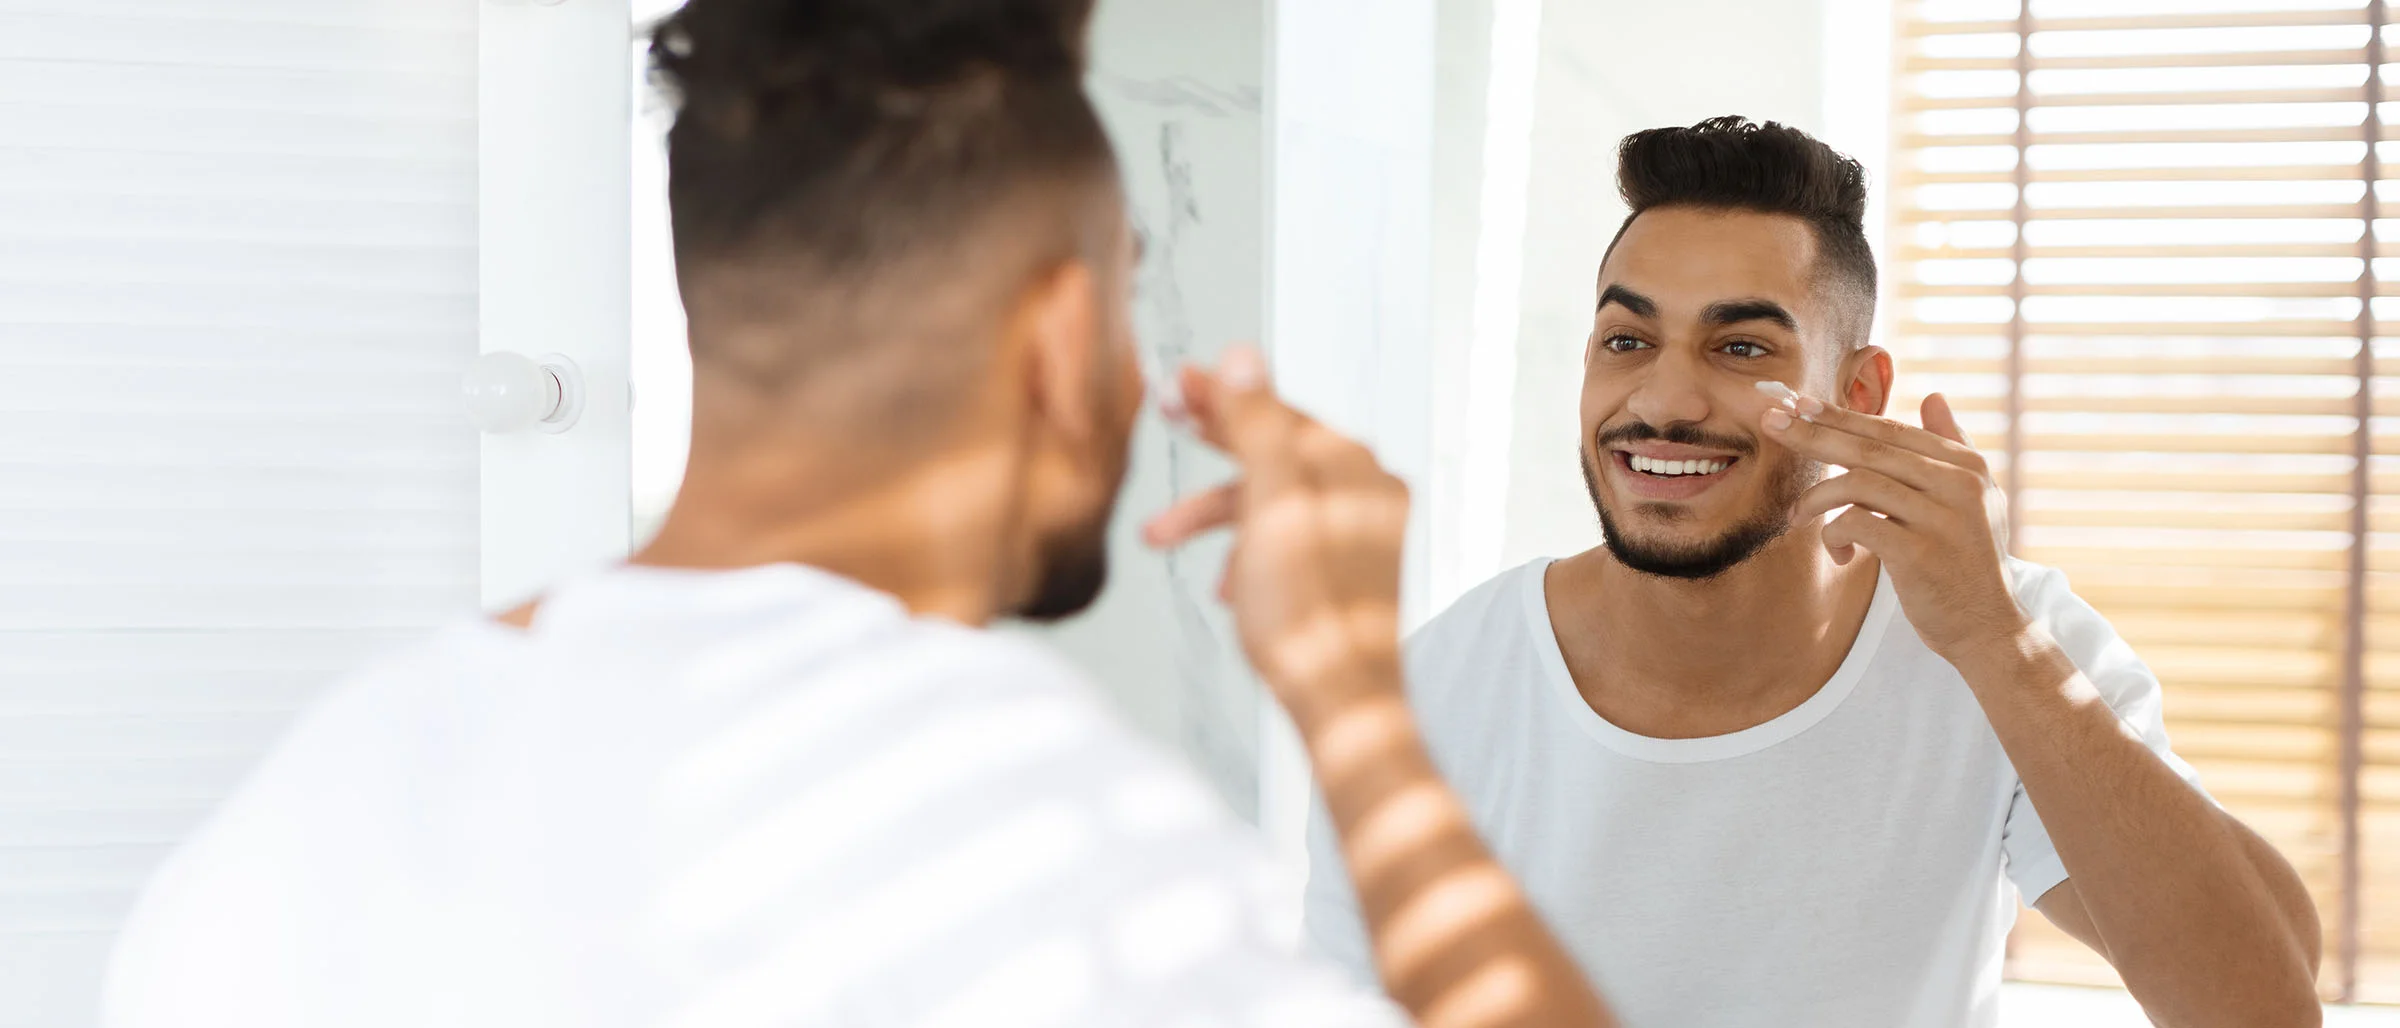 The best skin care routine for men, according to a dermatologist